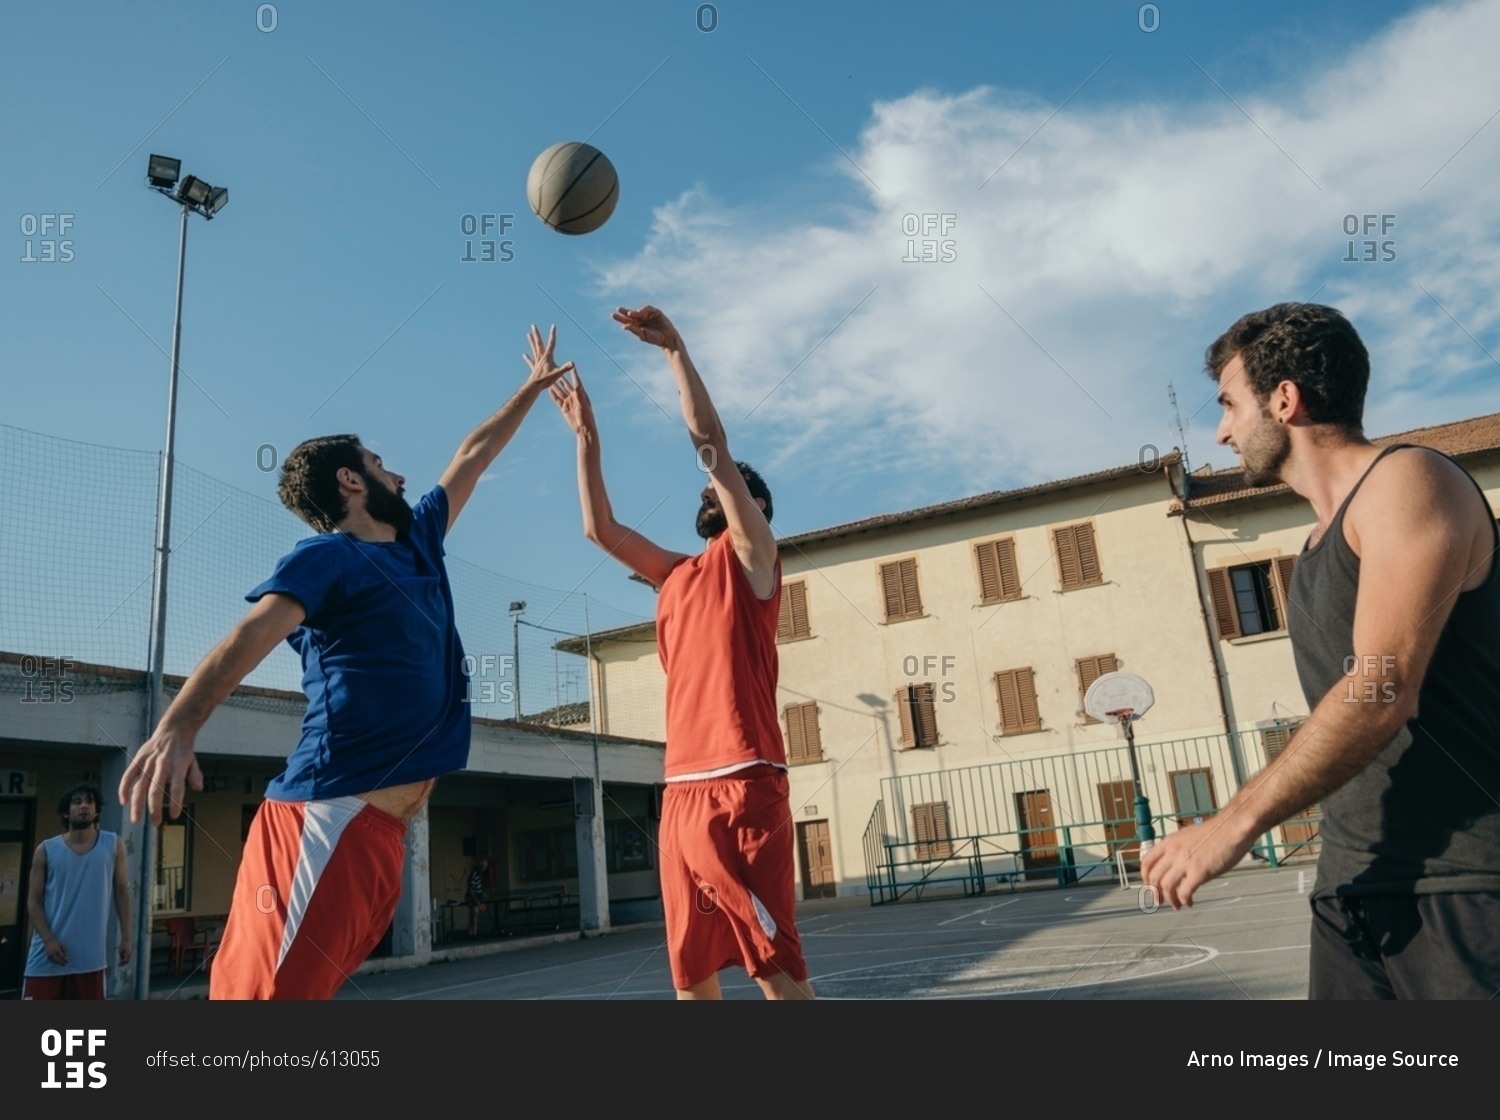 Friends on basketball court playing basketball game